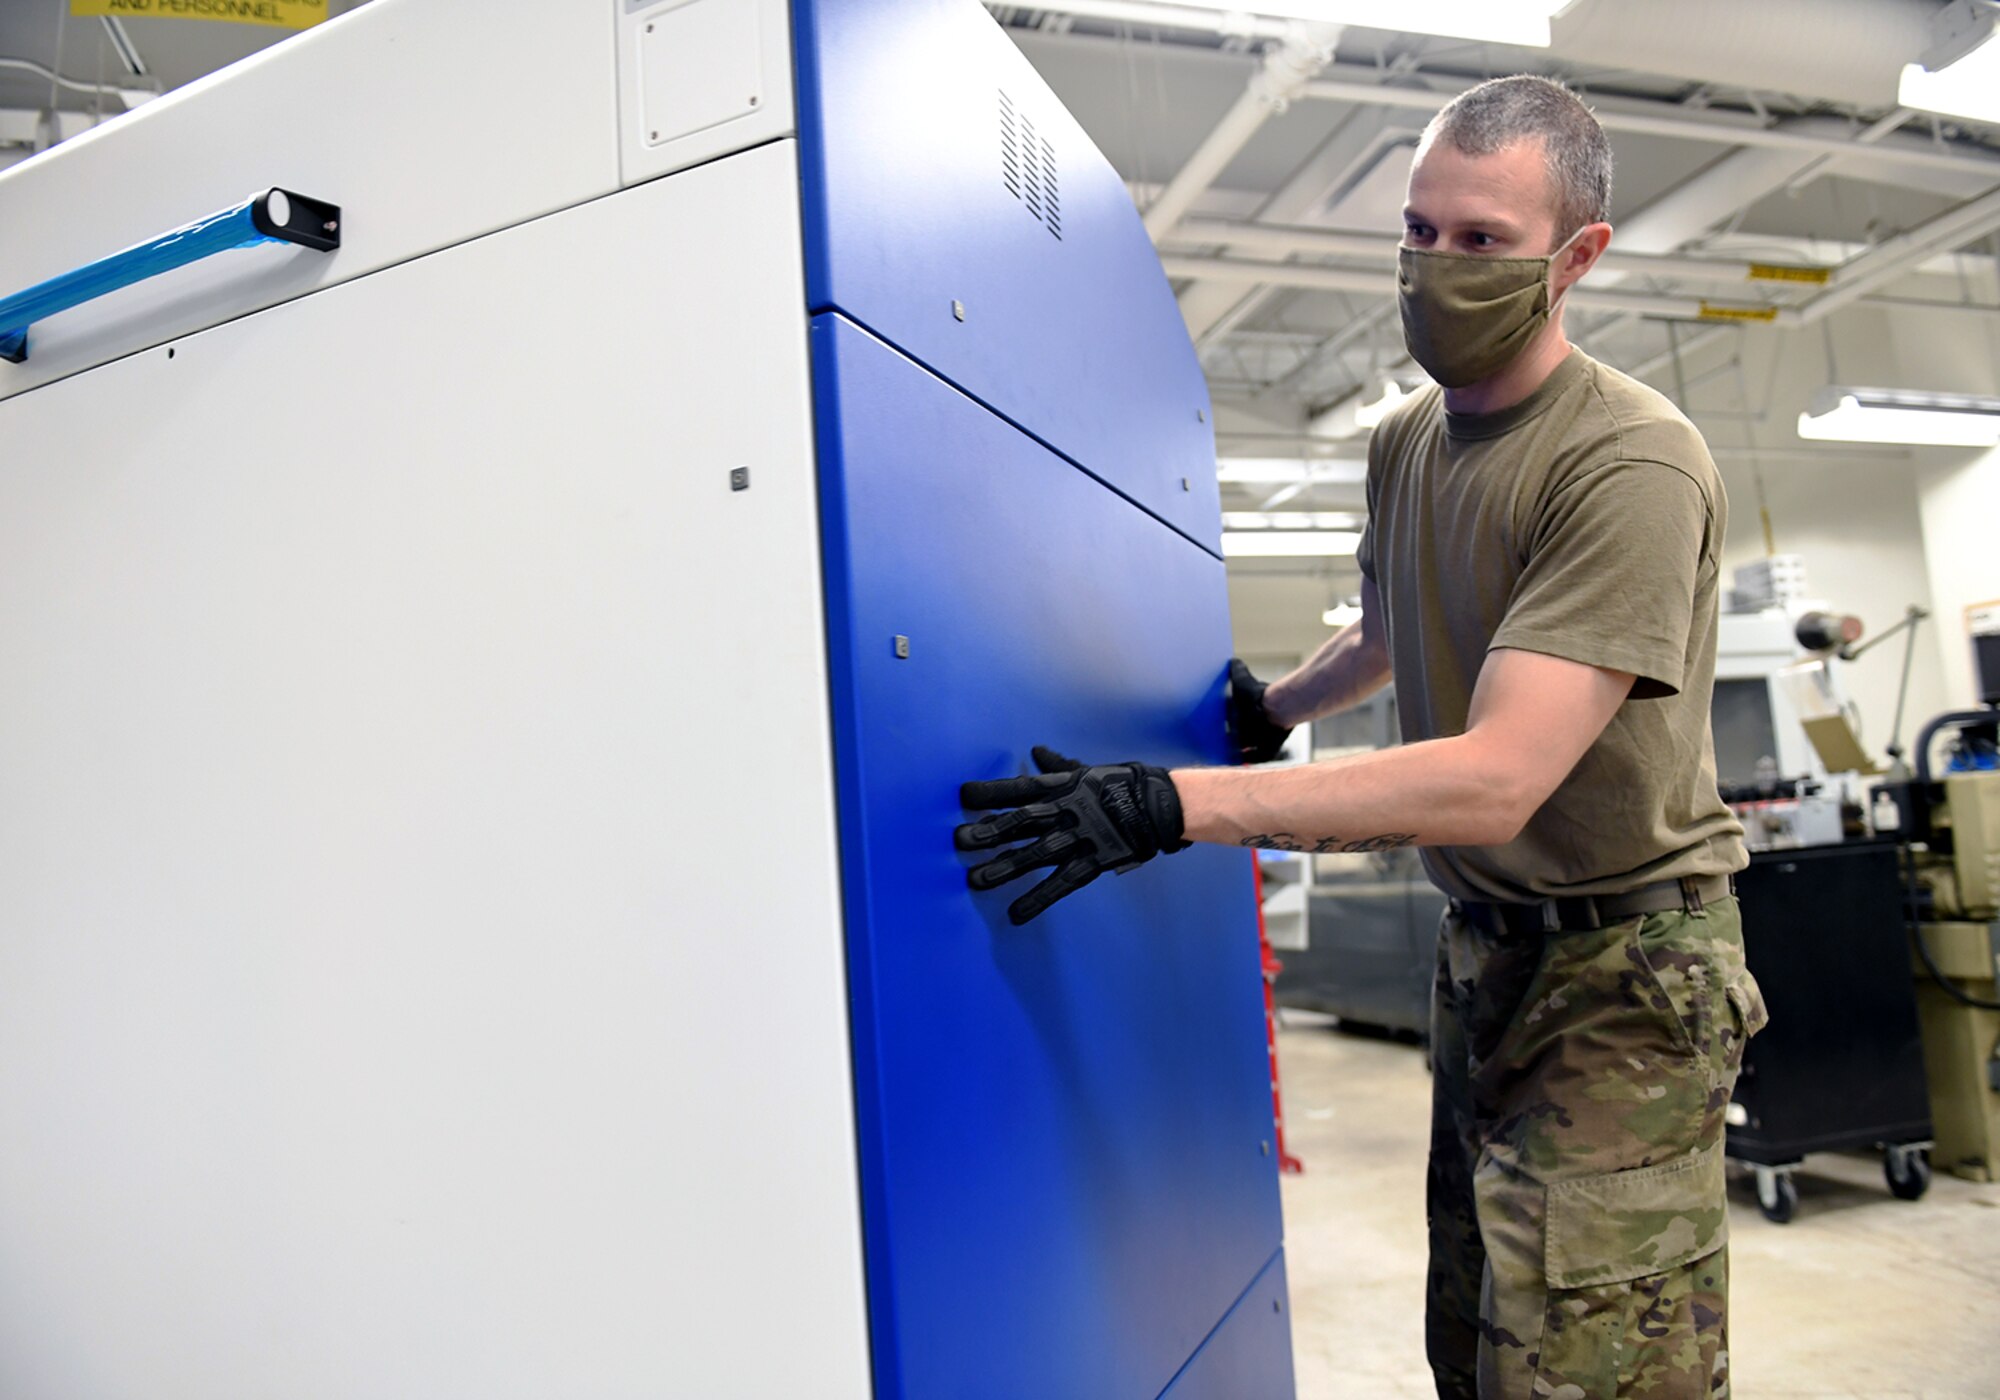 Staff Sgt. Joshua Turner, 149th Maintenance Squadron aircraft metals technician, moves a newly delivered printer into place at his unit’s shop Aug. 12, 2020 at Joint Base San Antonio-Lackland, Texas. (Air National Guard photo by Mindy Bloem)